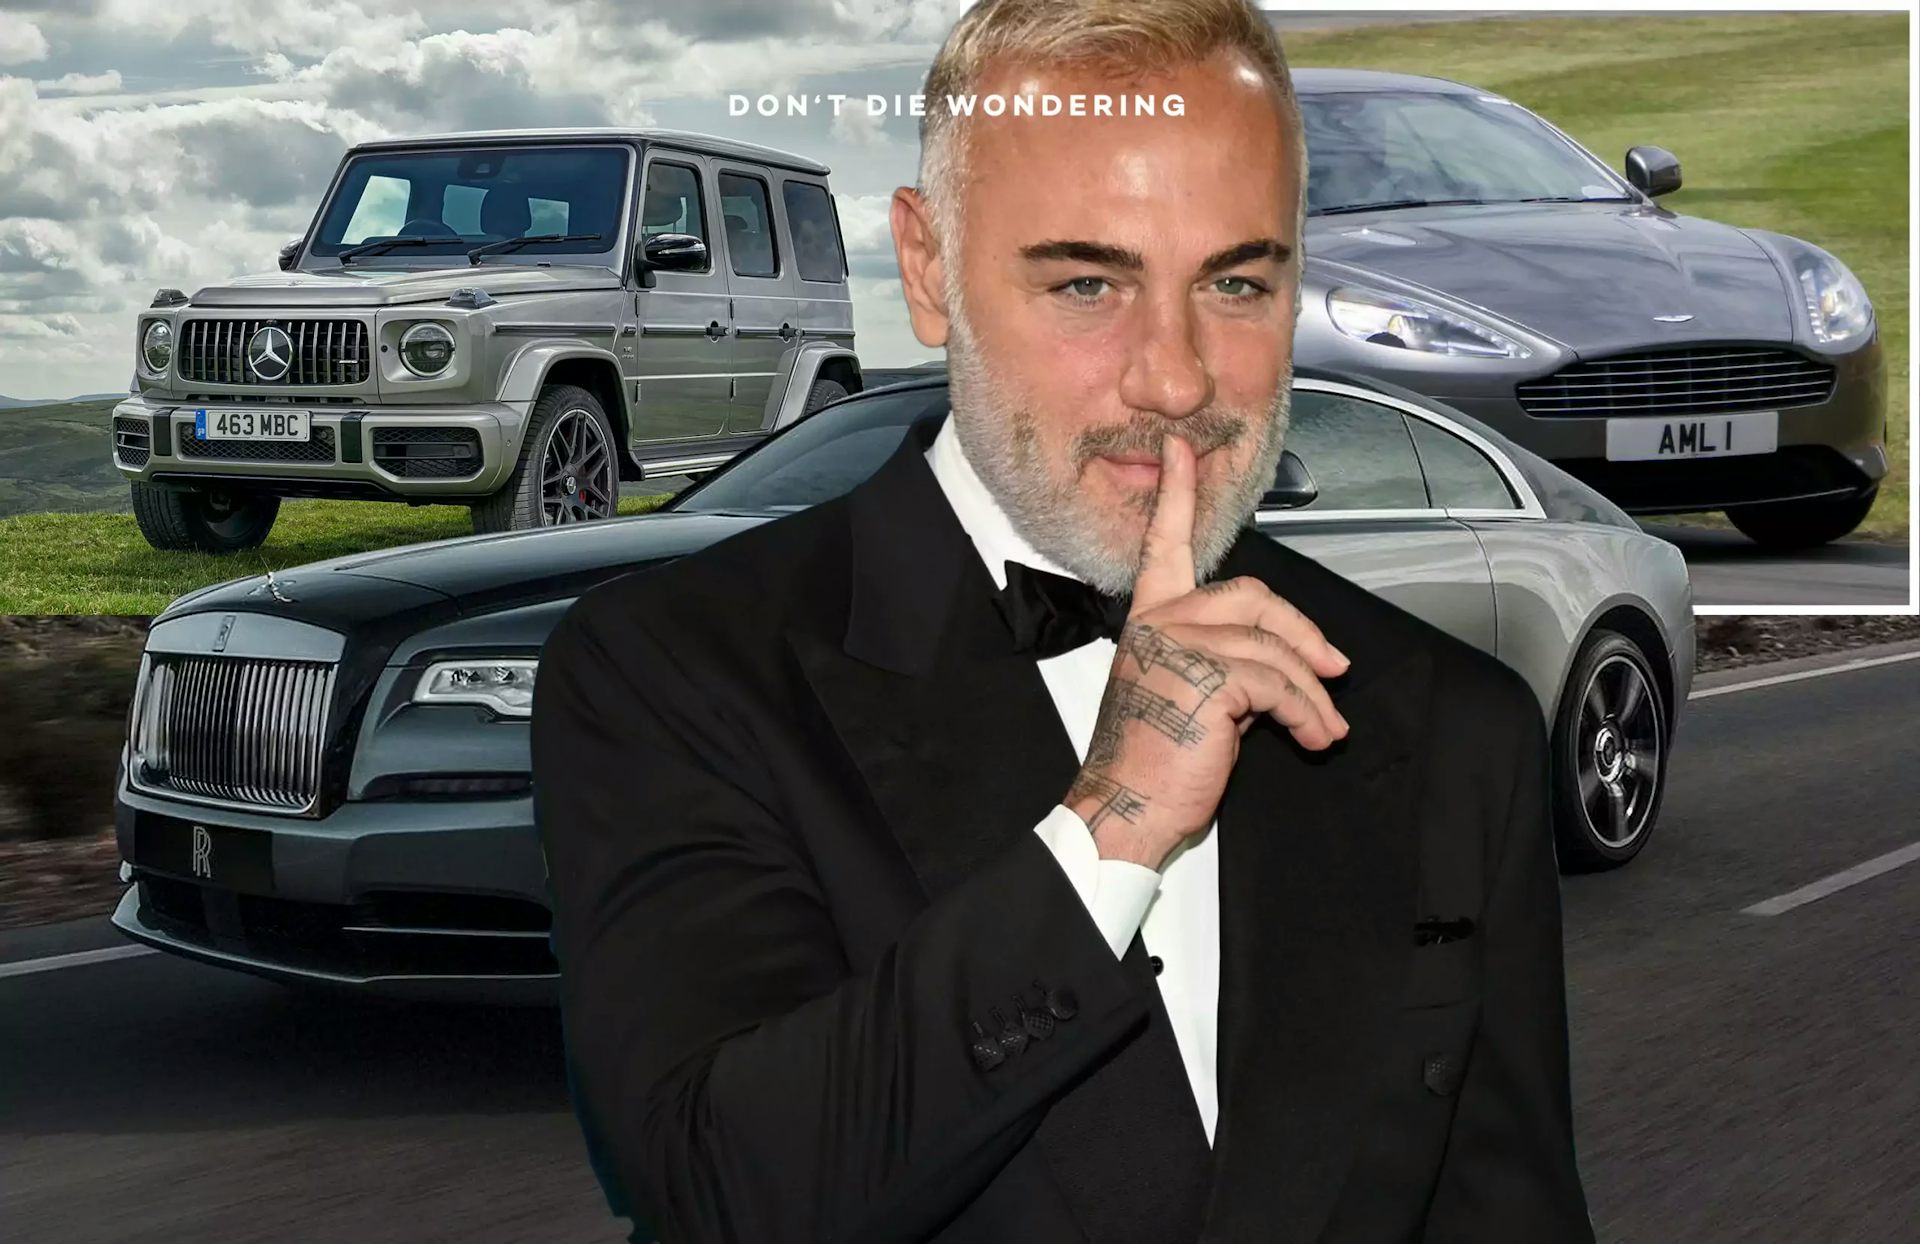 Every Car In Gianluca Vacchi The Italian Millionaire’s Collection